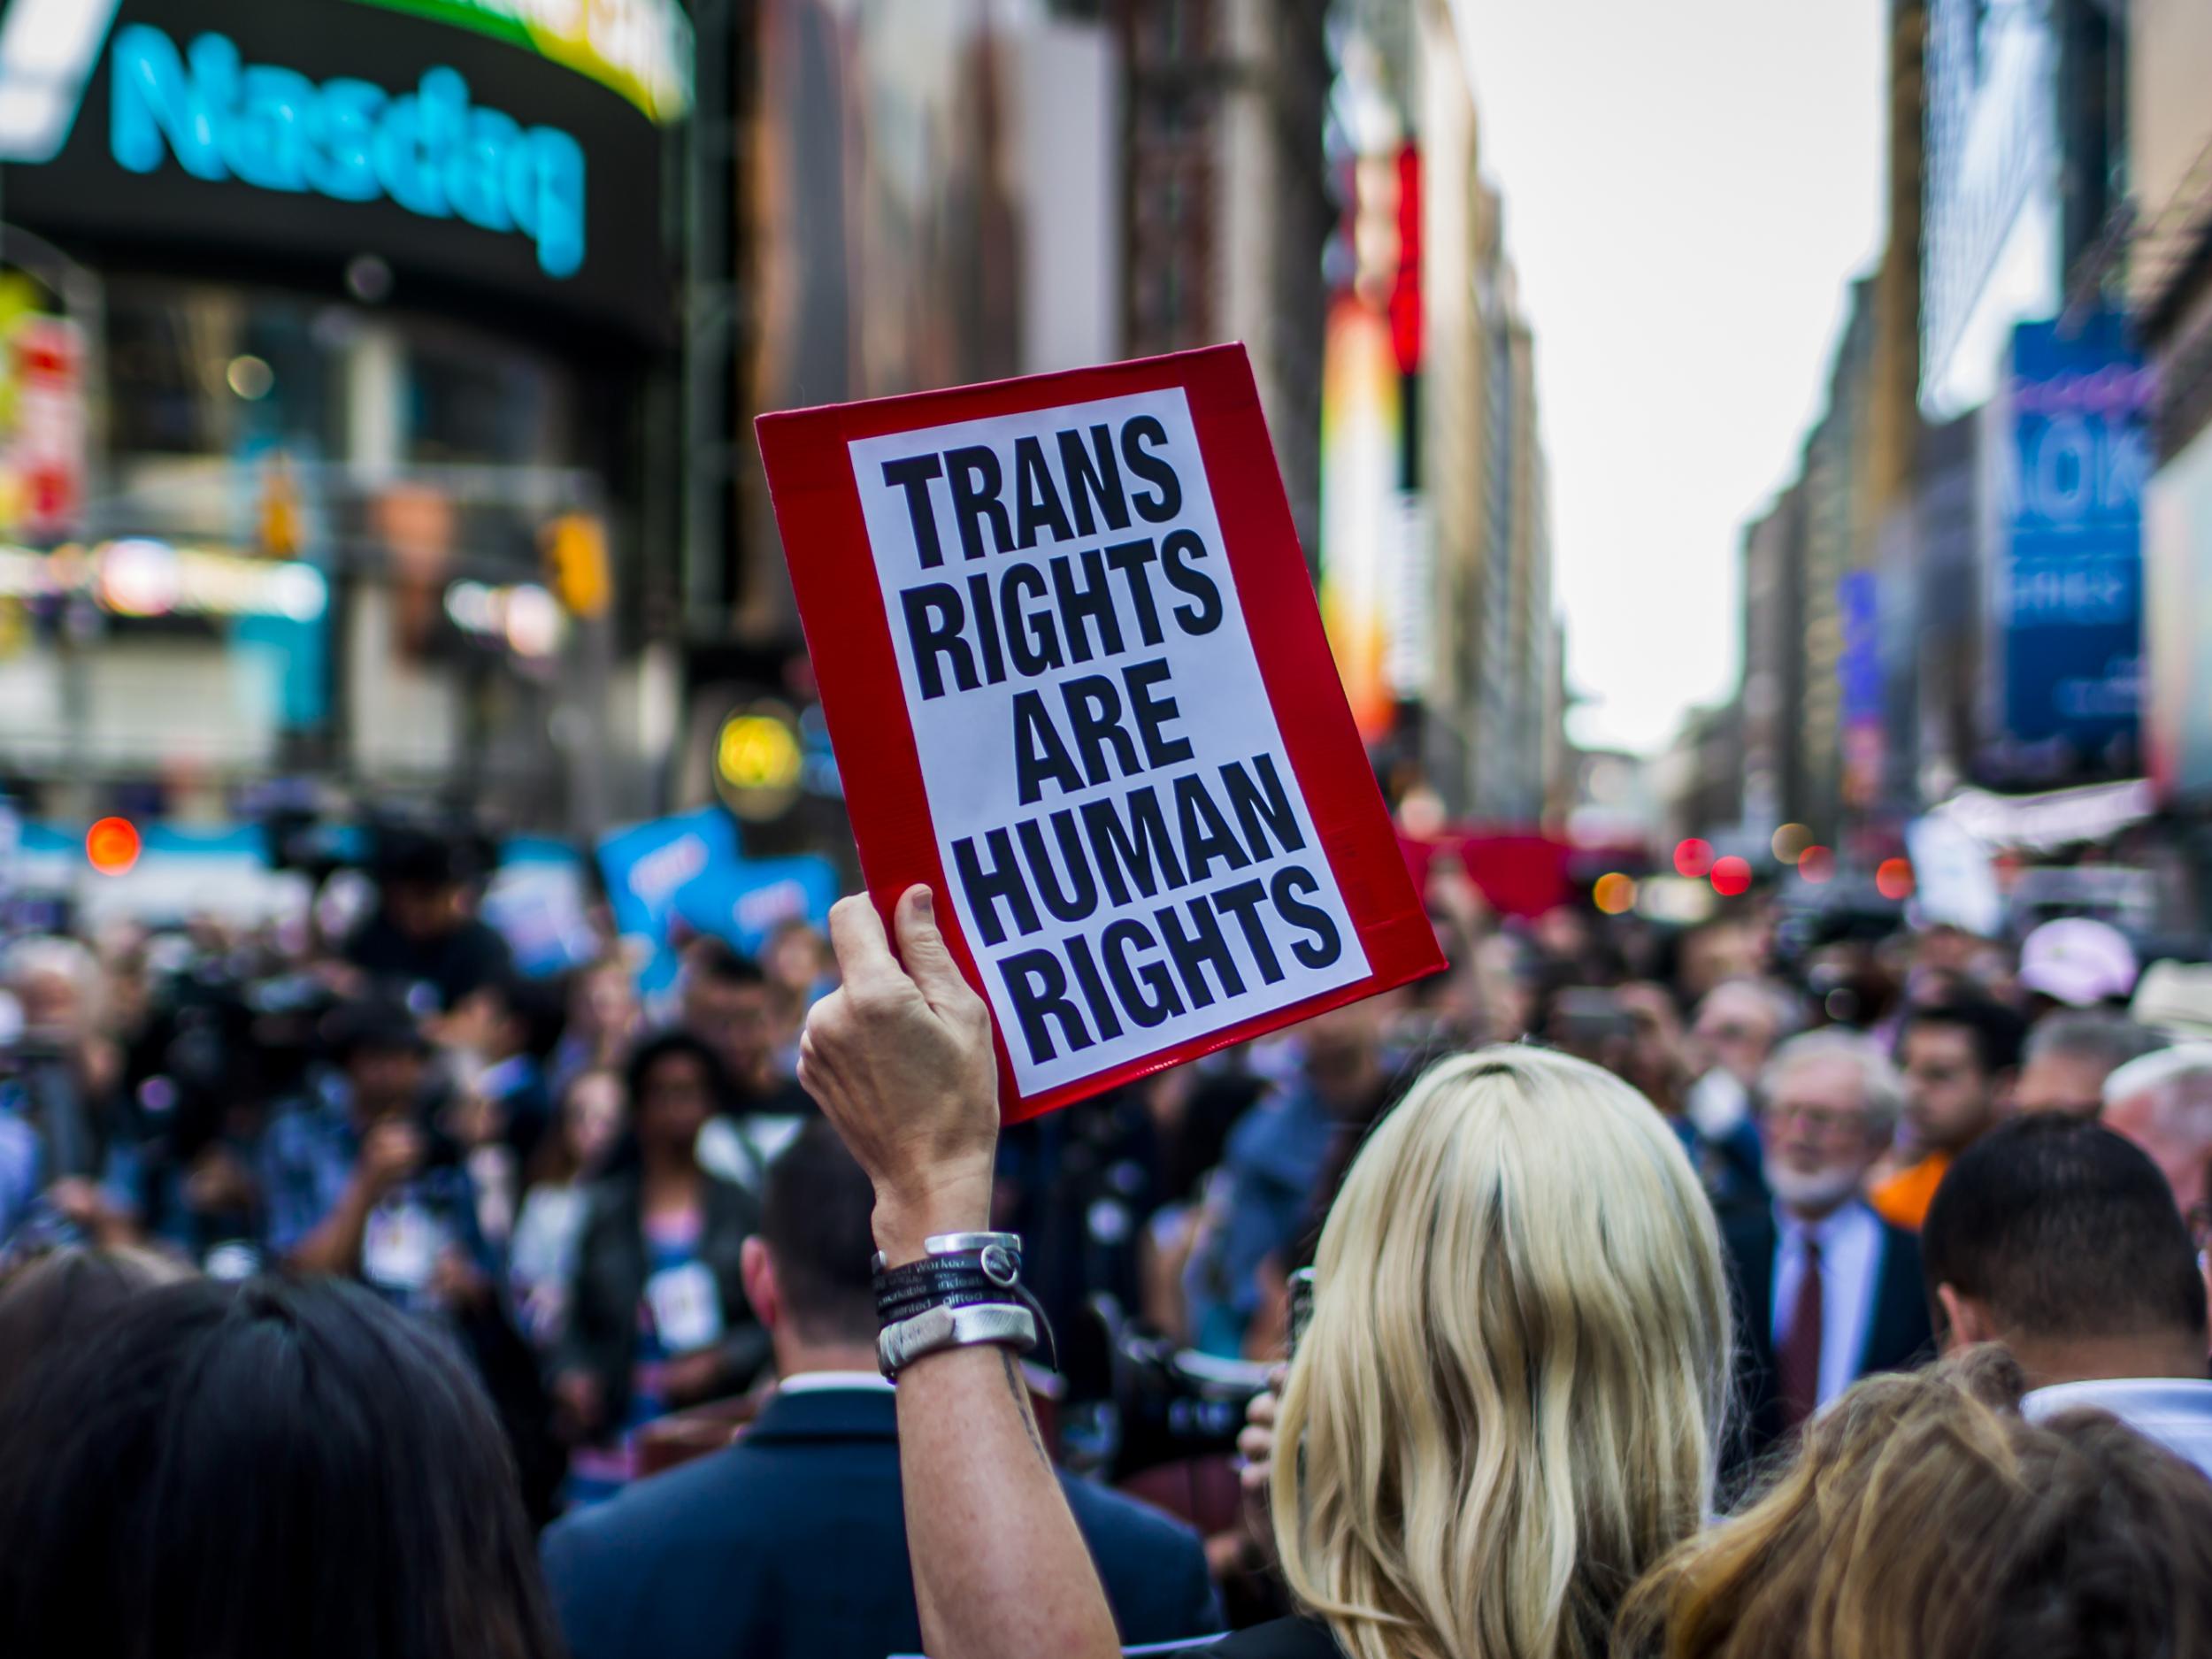 After a series of tweets by Trump, which proposed to ban transgender people from military service, thousands of New Yorkers took the streets in opposition last year